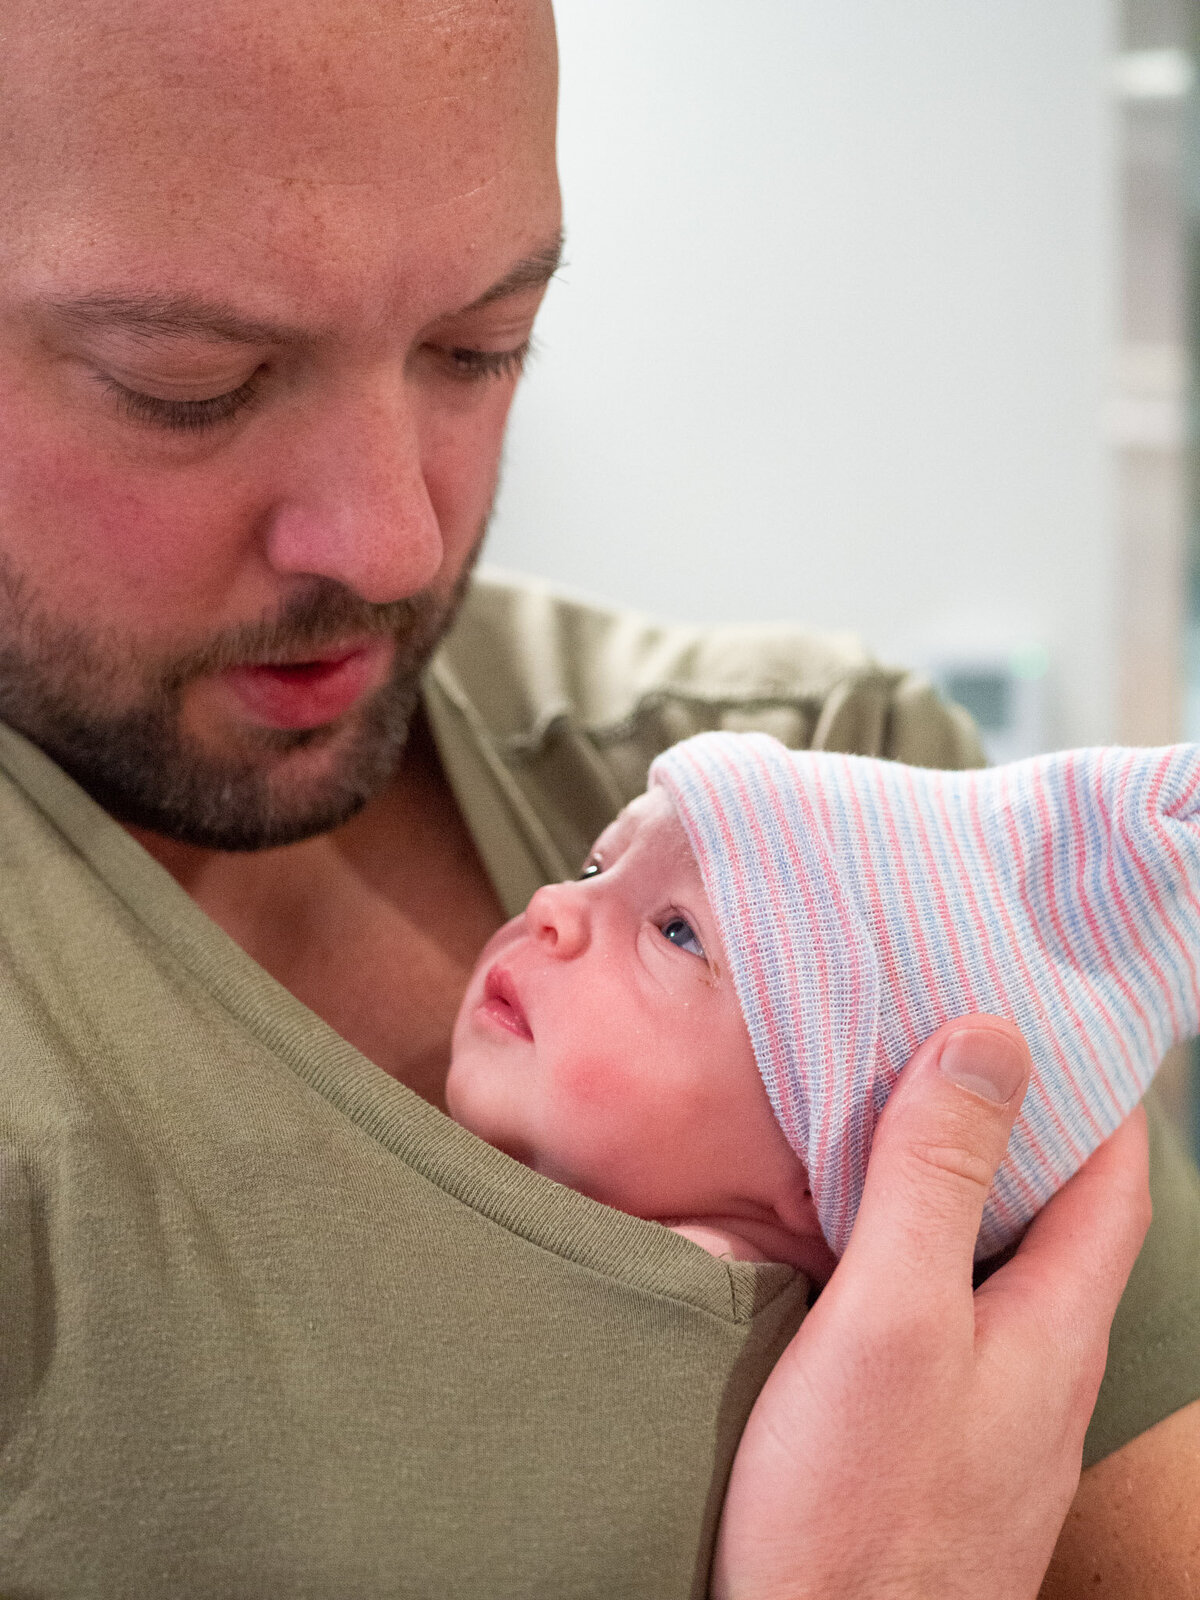 a brand new father is doing skin-to-skin with his new baby daughter.